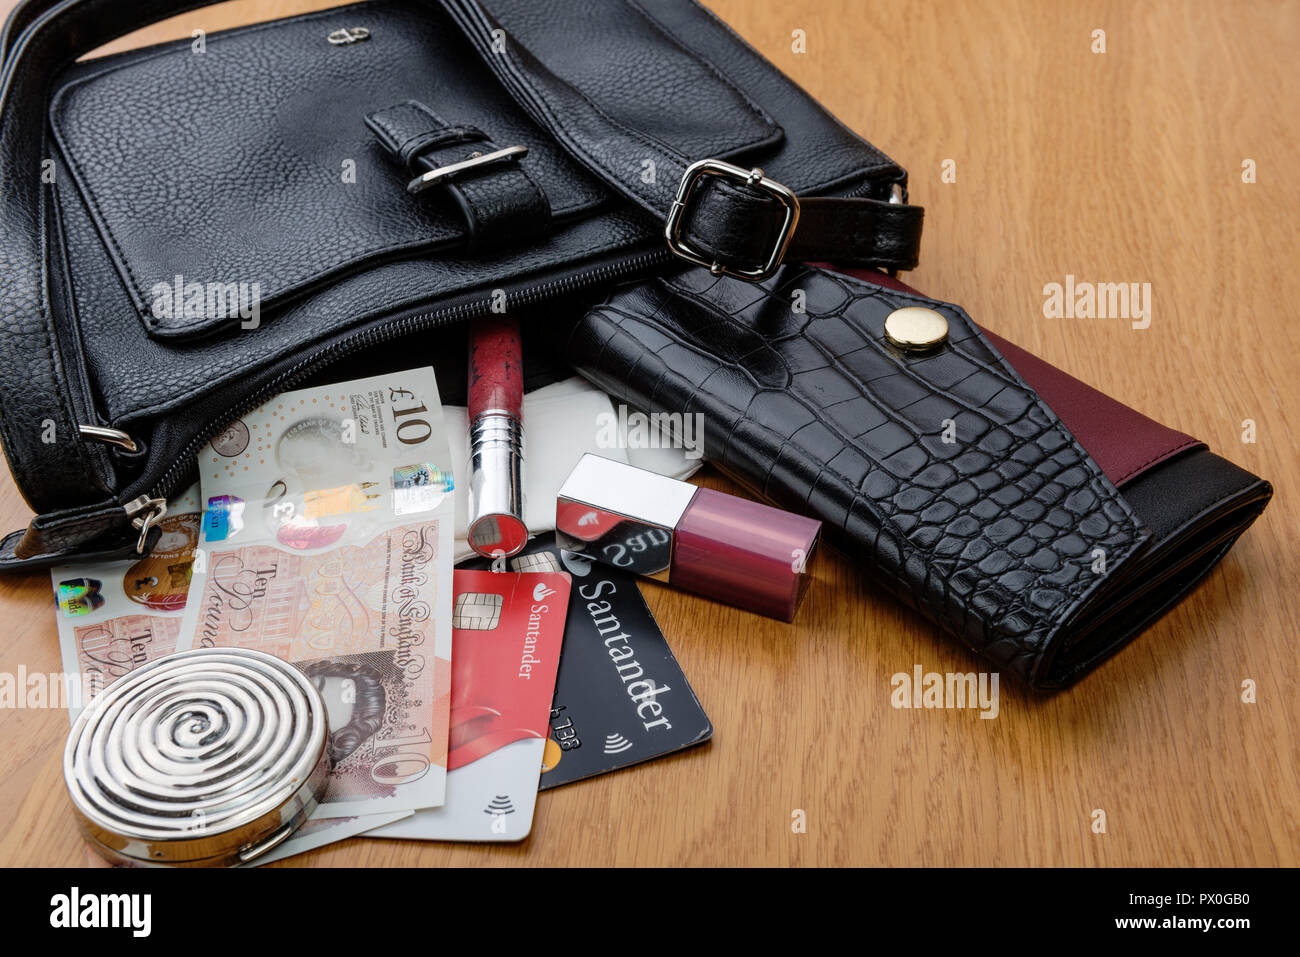 Women's handbag and purse, the contents emptied out. Showing some cosmetics, cash and bank cards. Stock Photo